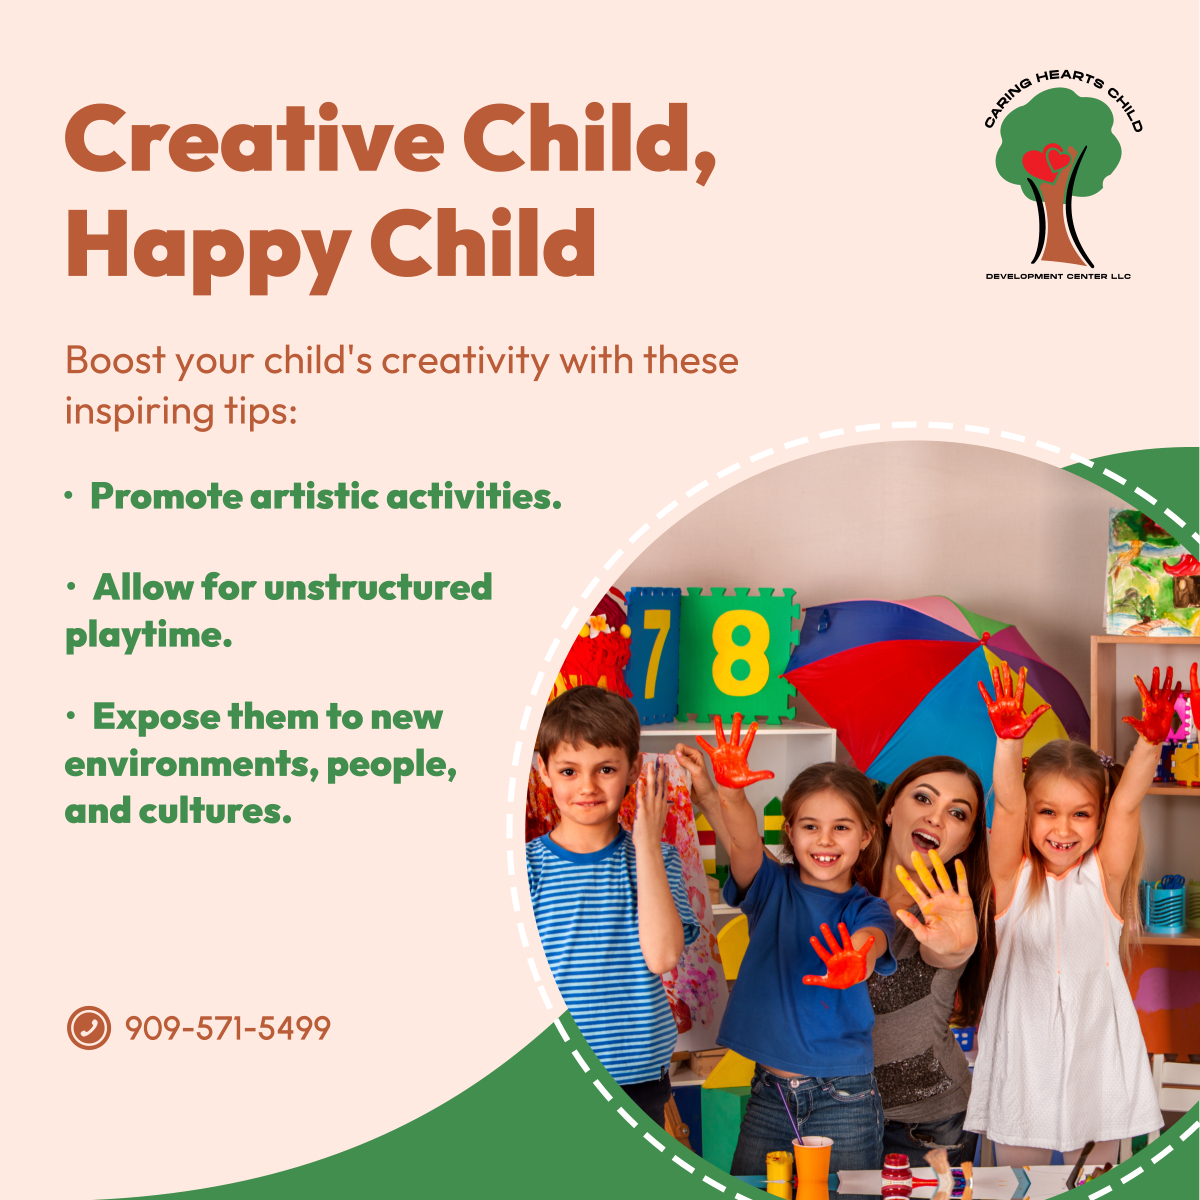 Ignite the creative spark in your child with art, unstructured play, & diverse social exposure; nurture their artistic passions and witness the happiness and pride it brings.

#ChildCare #ChildCreativity #SanBernardinoCA